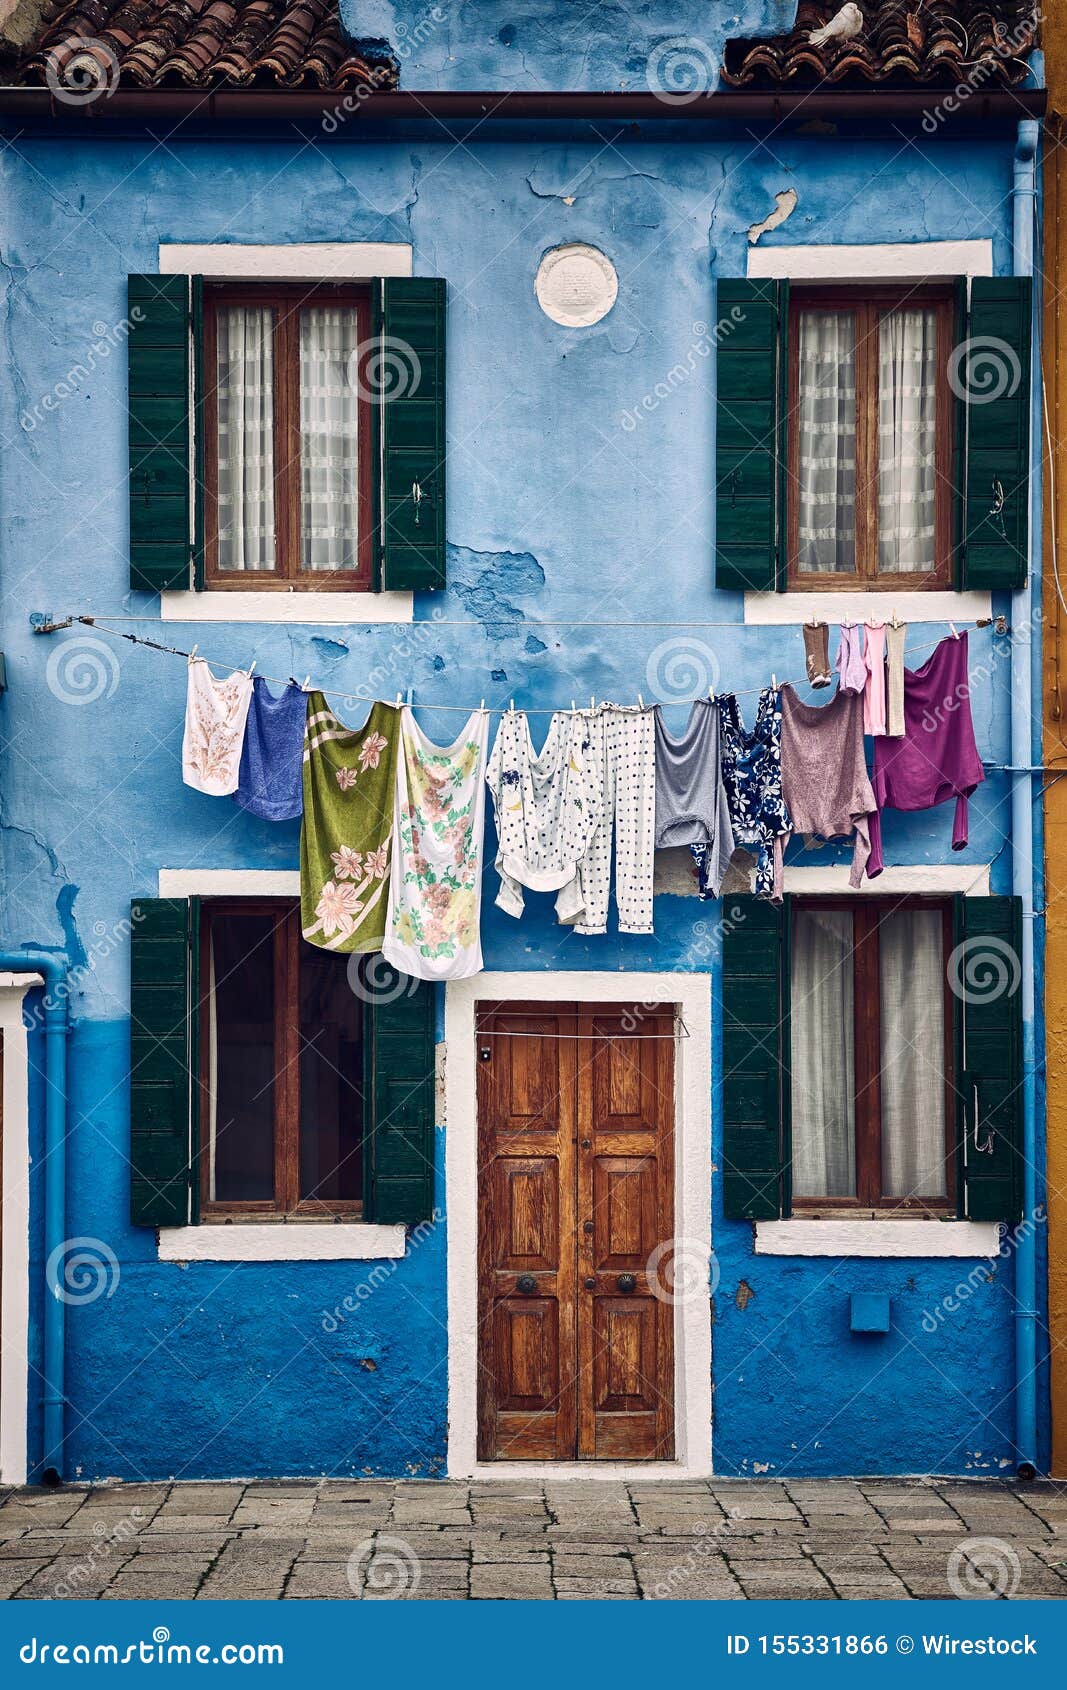 A beautiful vertical symmetric shot of a suburban blue building with clothes hanging on a rope